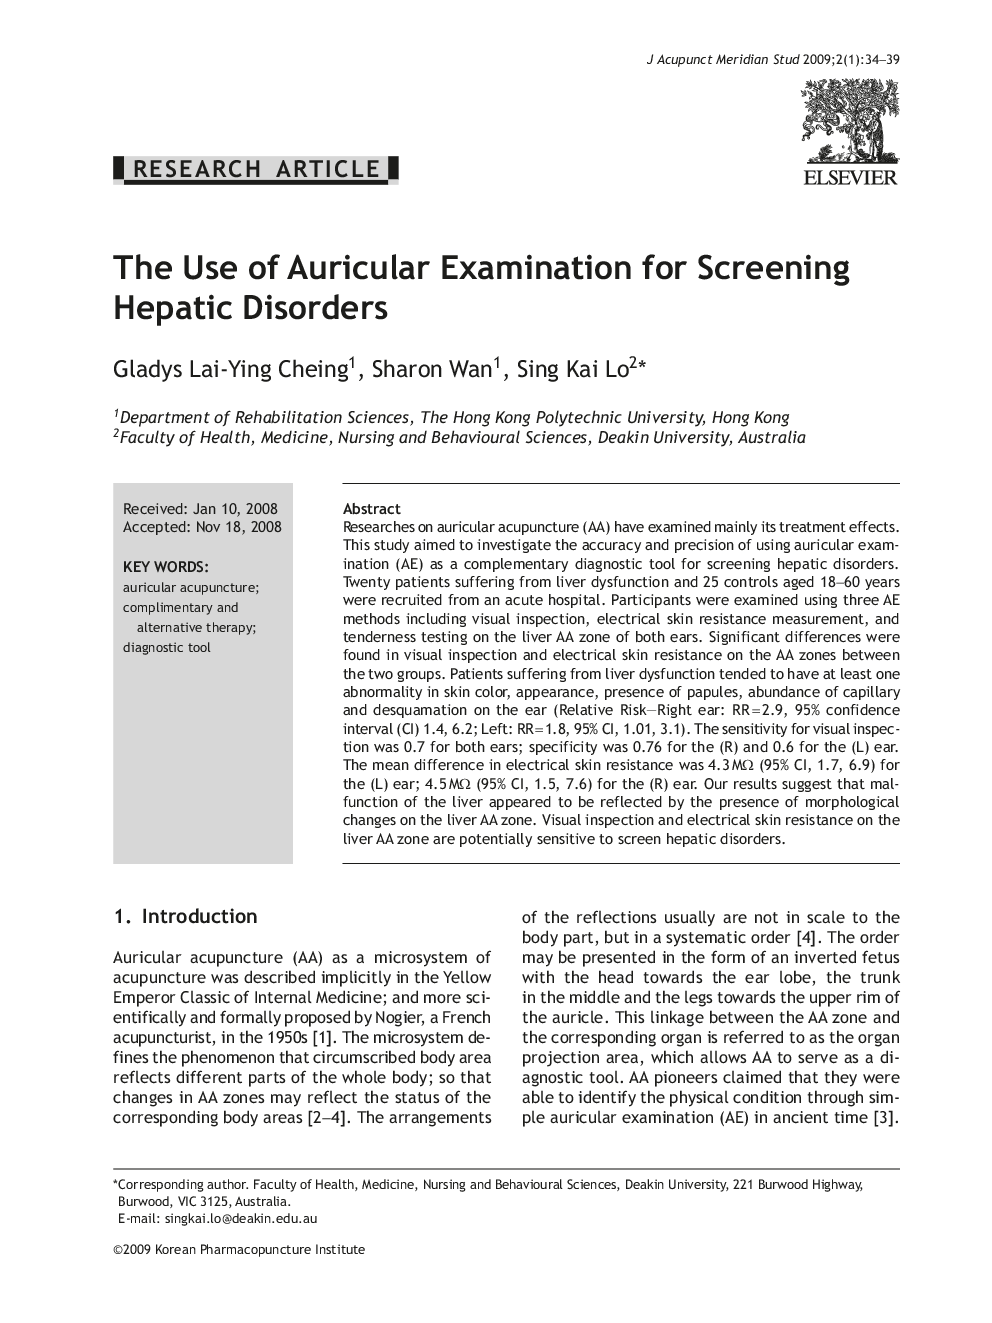 The Use of Auricular Examination for Screening Hepatic Disorders